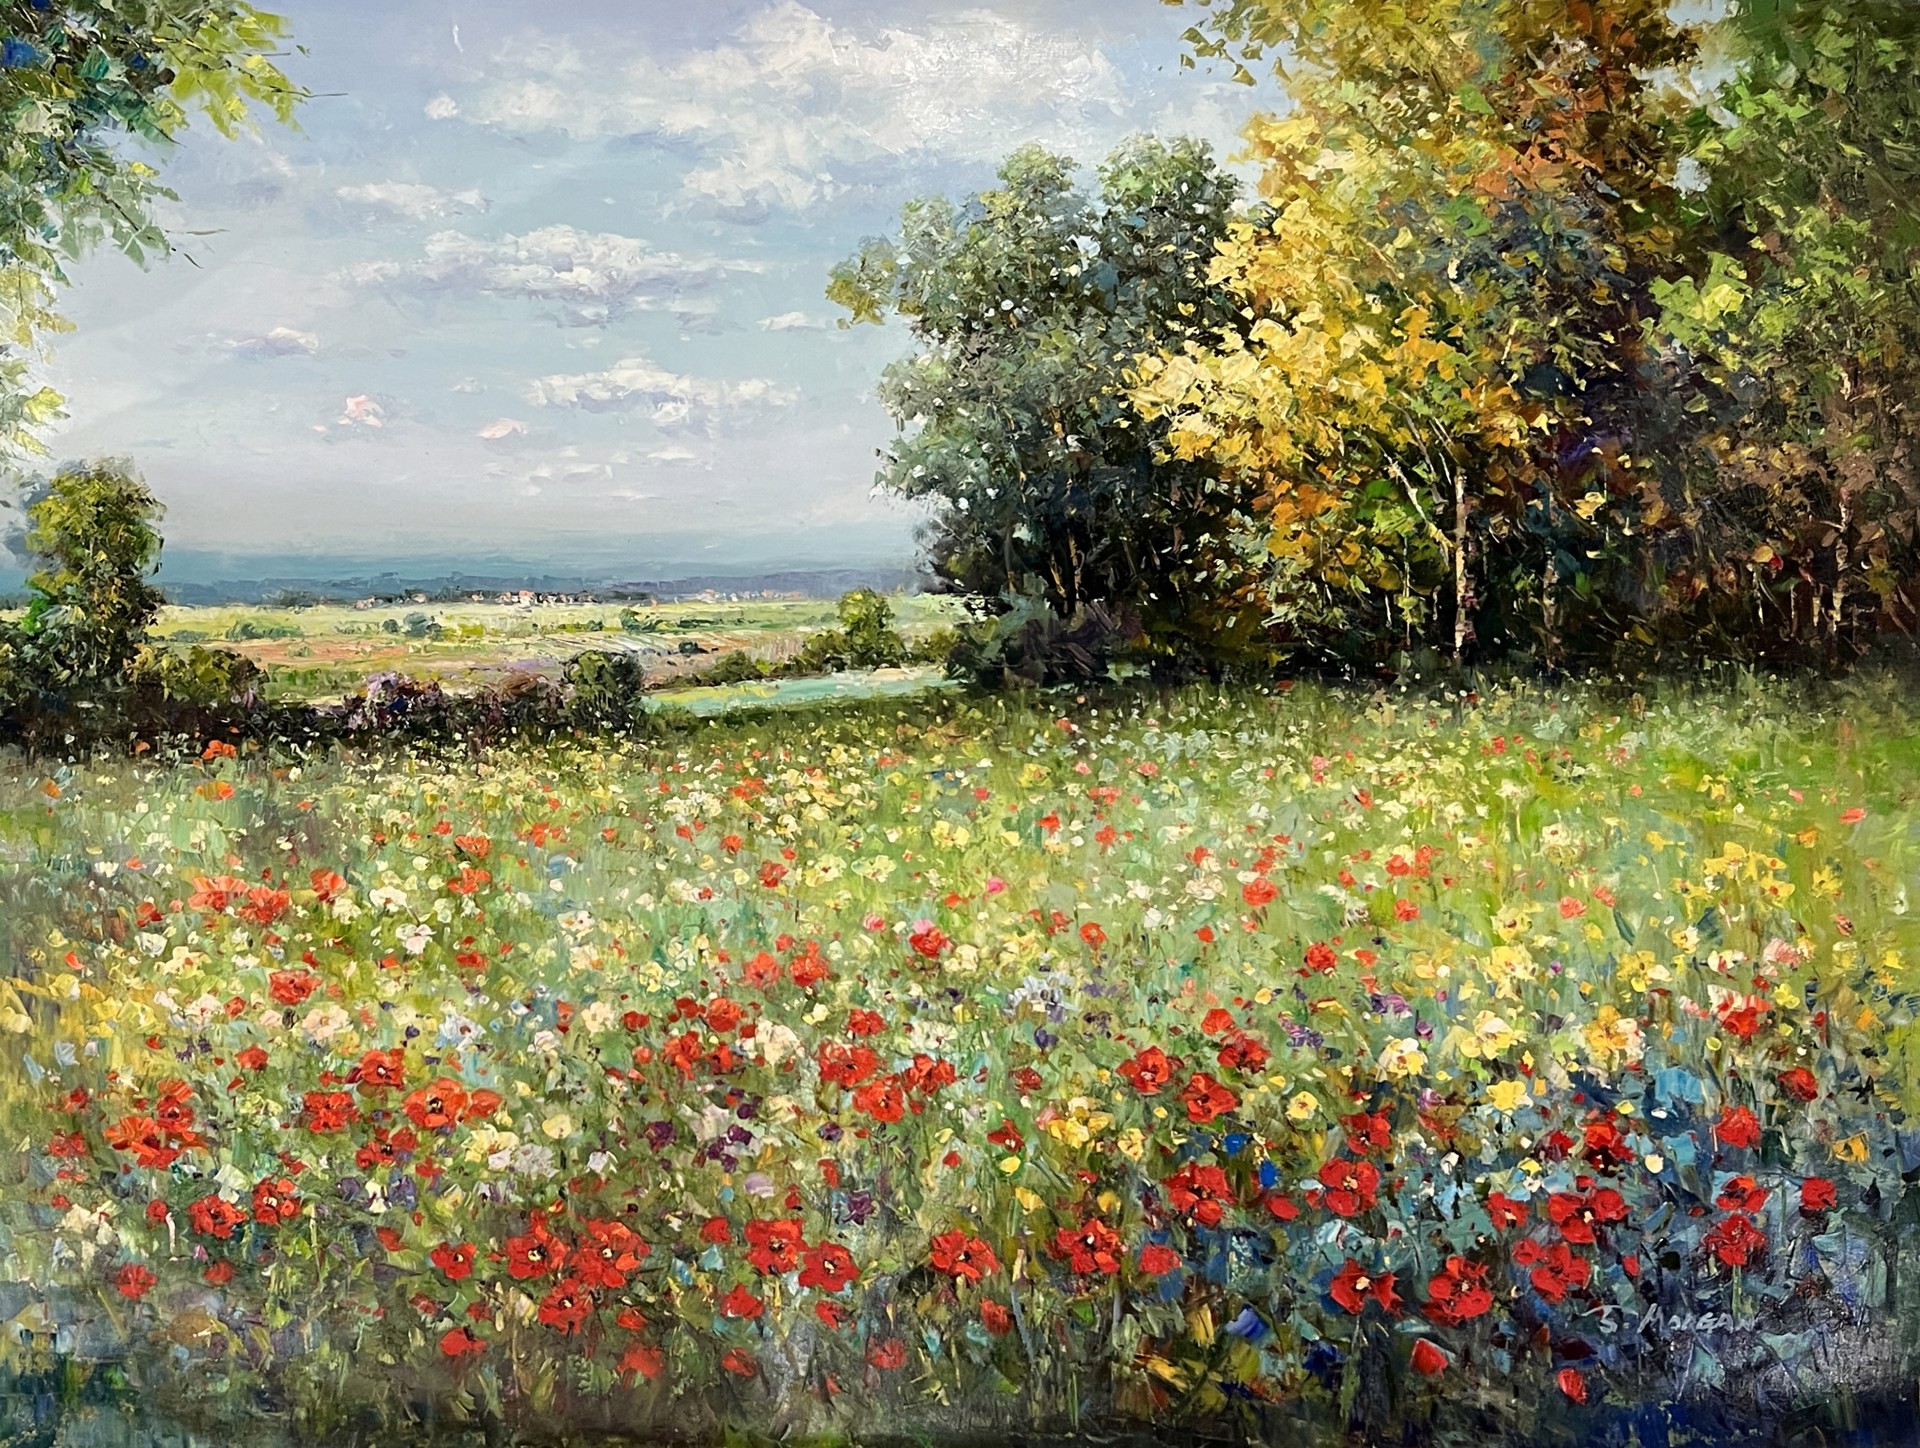 MEADOW OUTSIDE OF TOWN by J MORGAN